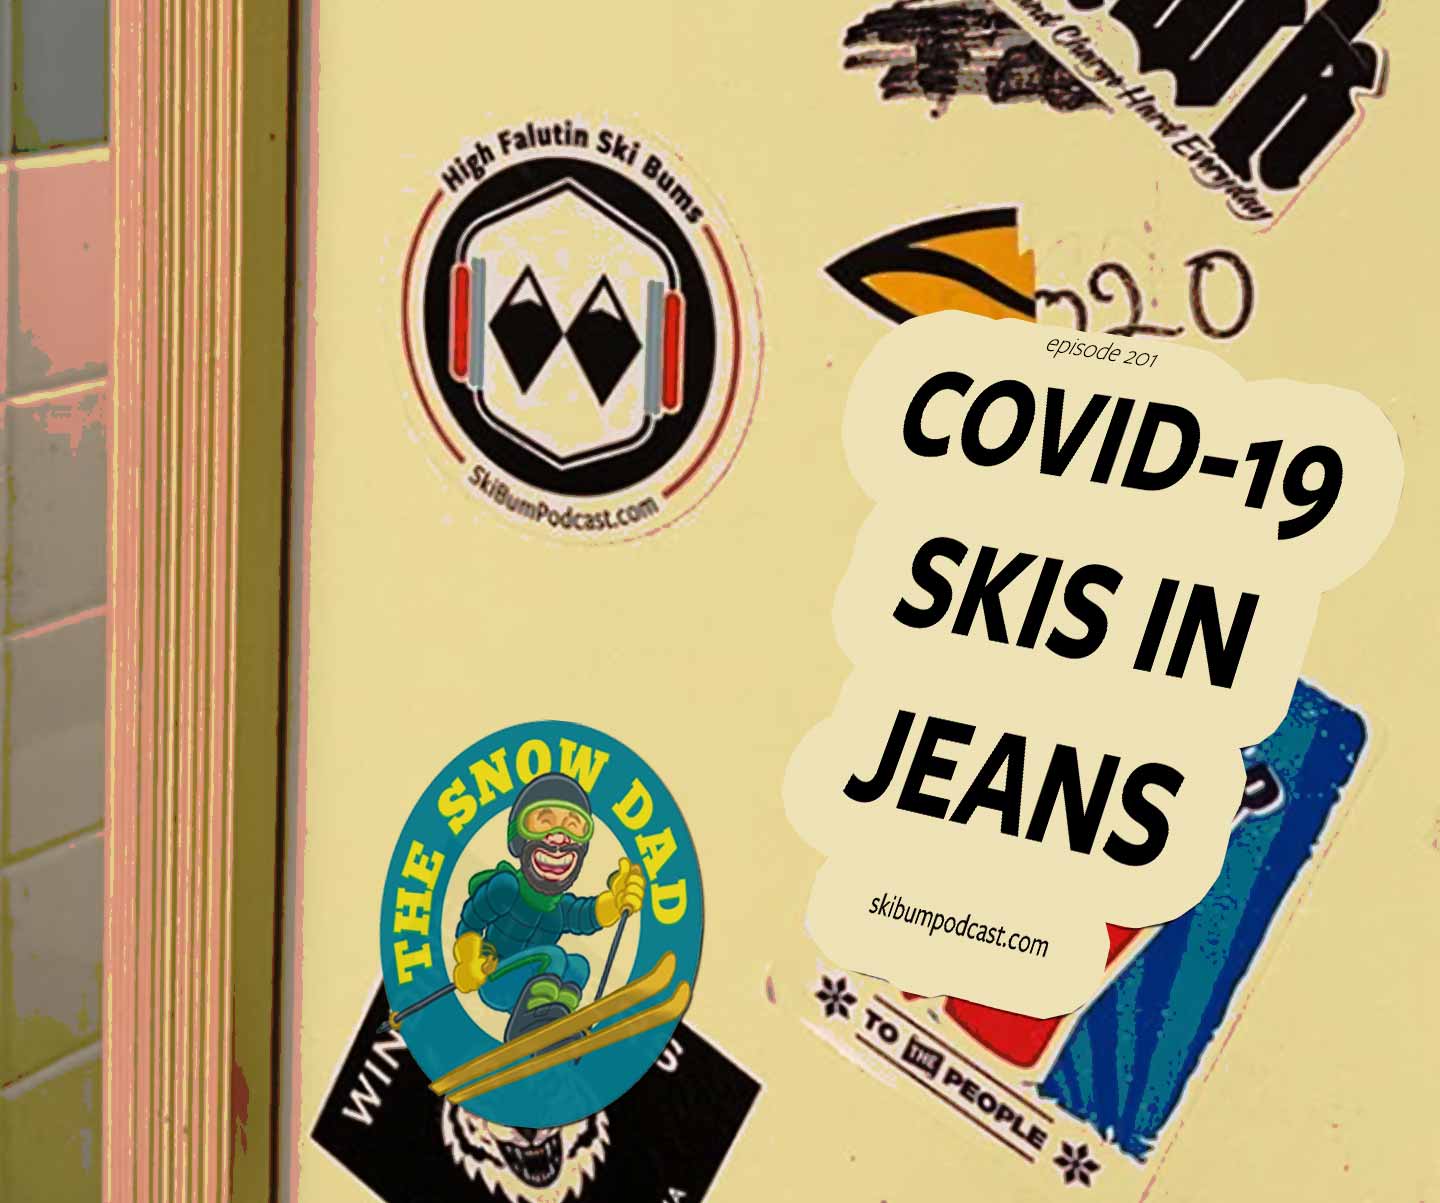 episode 201 - covid-19 skis in jeans